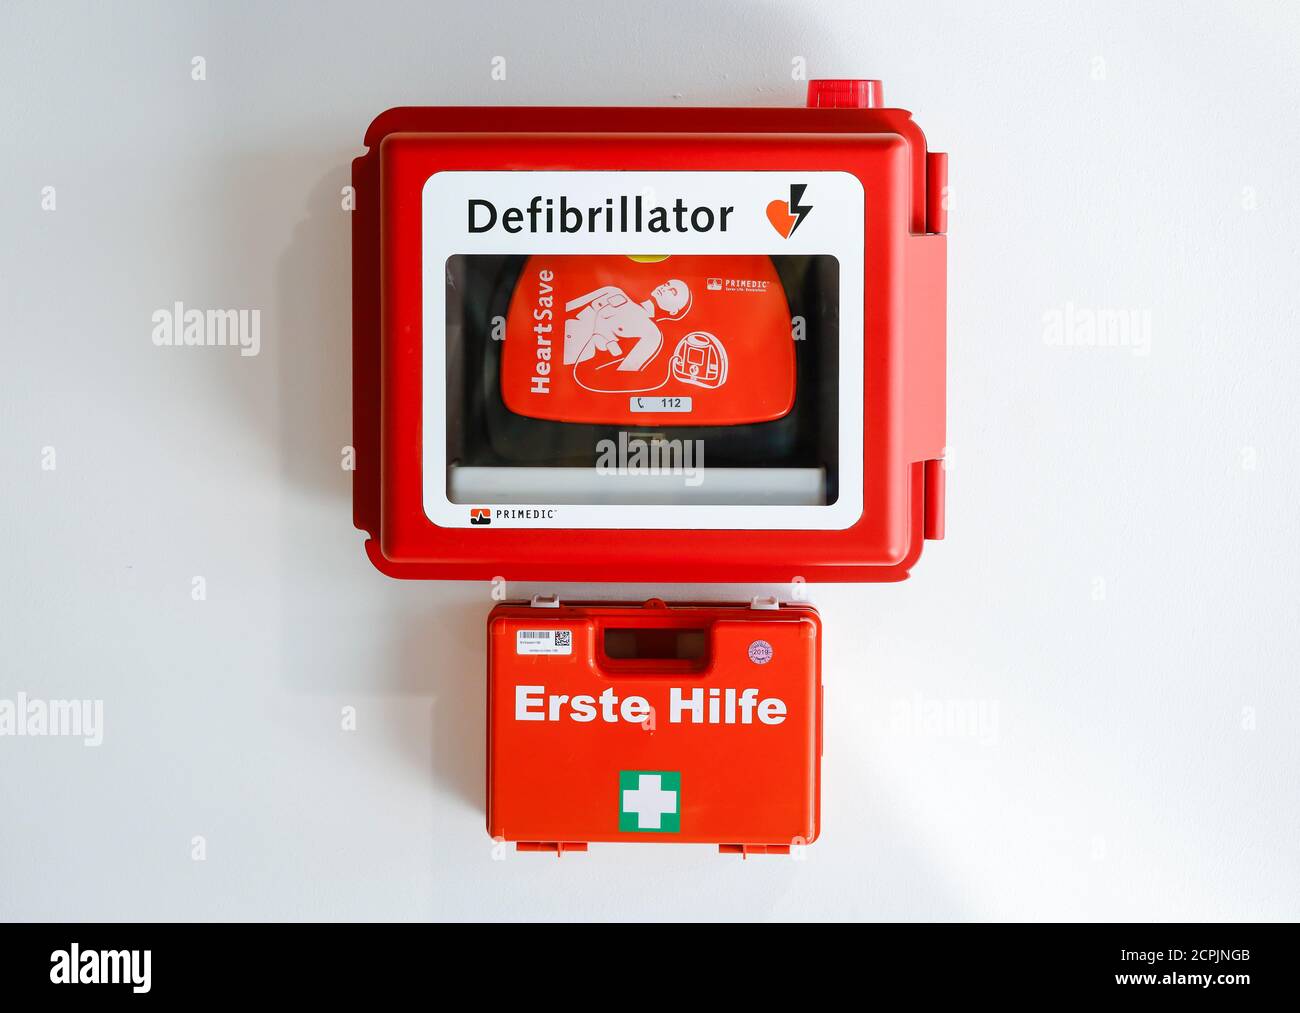 Defibrillator and first aid first aid kit hang on a wall in public space at Düsseldorf Airport, North Rhine-Westphalia, Germany Stock Photo